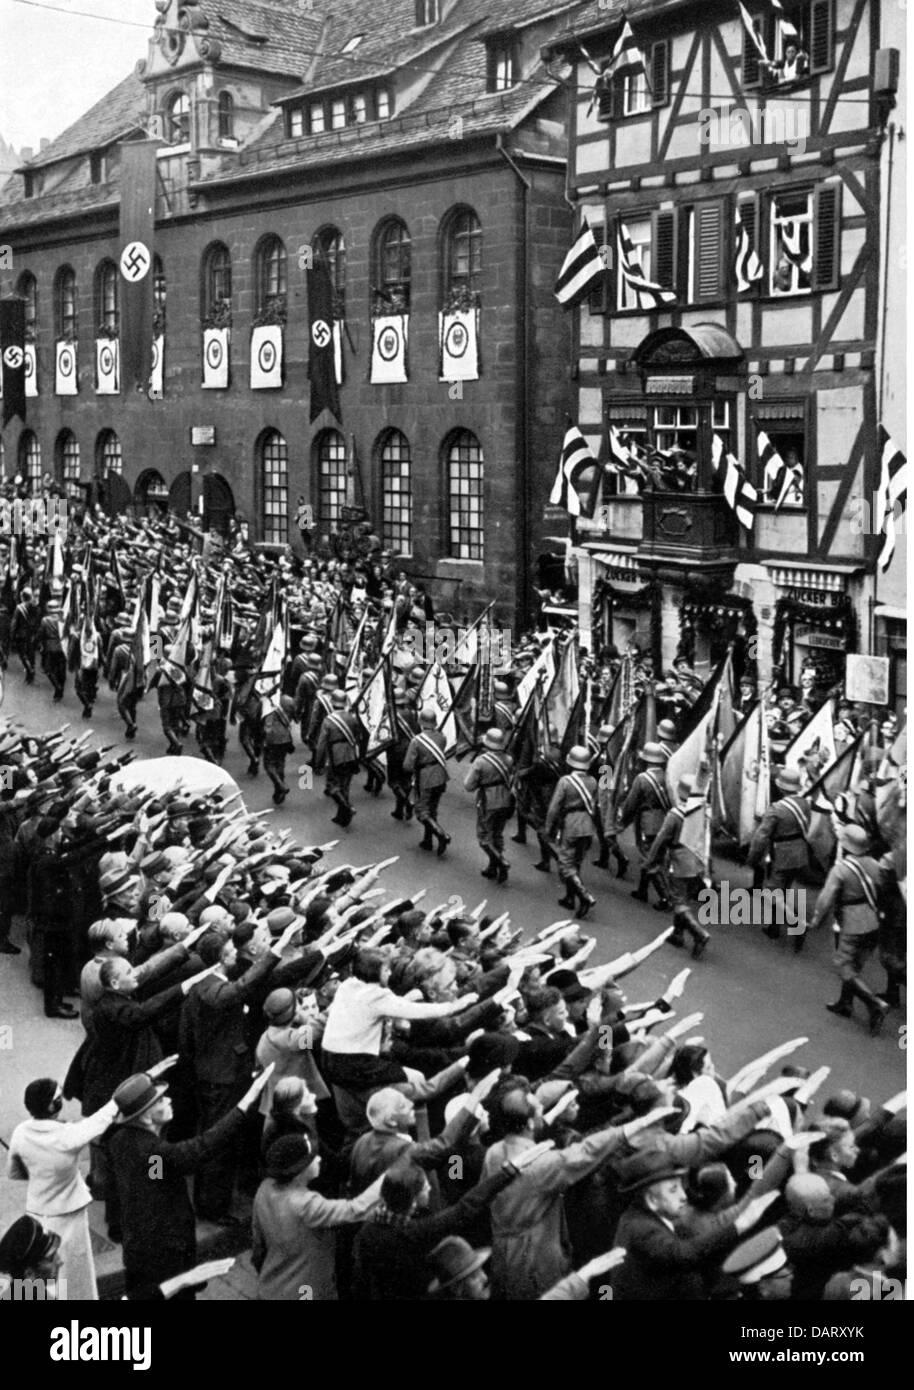 Nazism / National Socialism, Nuremberg Rally, 'Reichsparteitag der Freiheit' ('Rally of Freedom'), 10. - 16.9.1935, soldiers of the Wehrmacht with regimental colours of the Imperial Army, Nuremberg, Additional-Rights-Clearences-Not Available Stock Photo